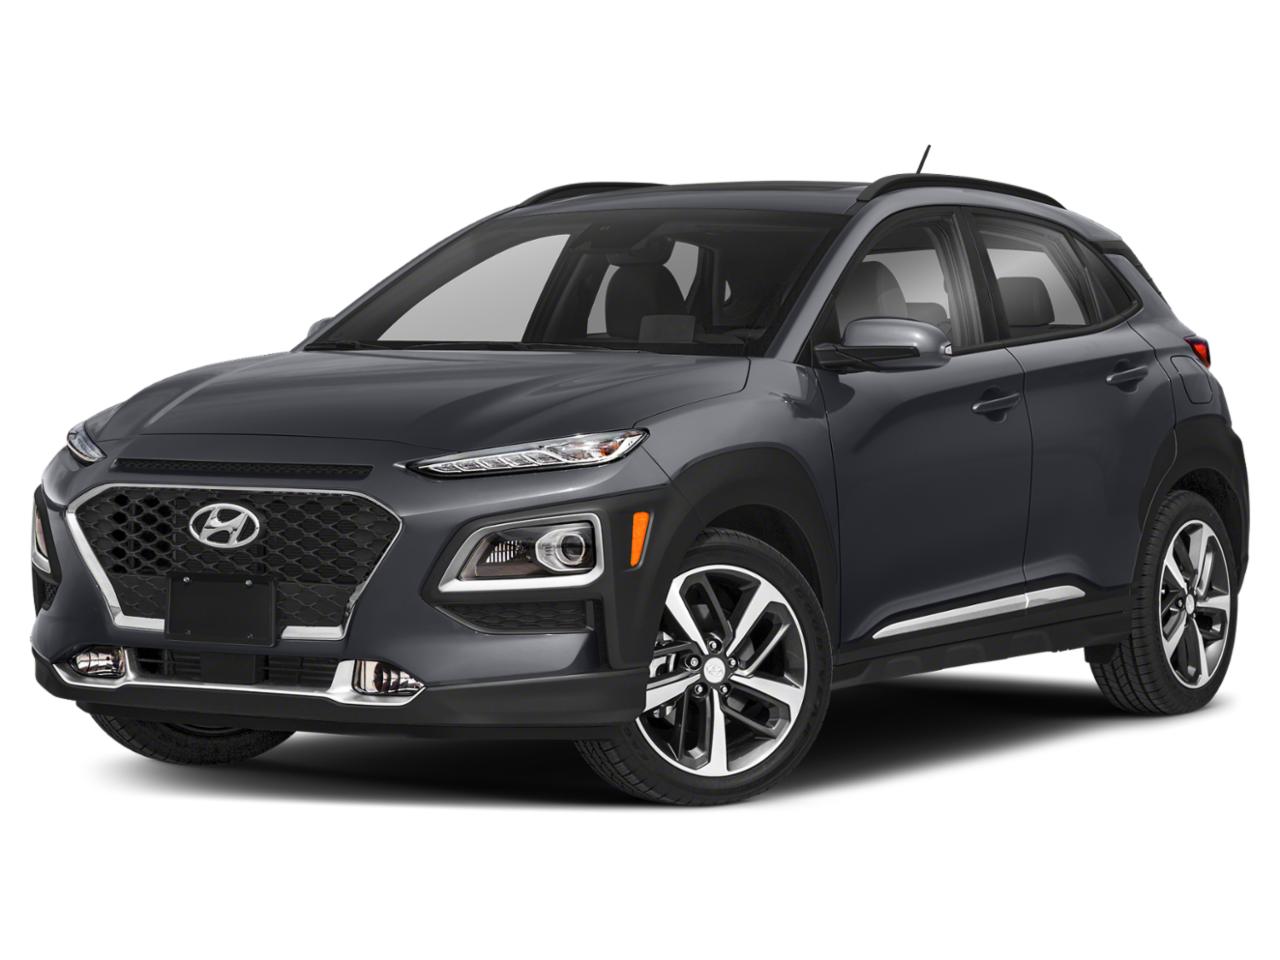 Used, Certified Hyundai Kona Vehicles for Sale in COLEBROOK, NH ...